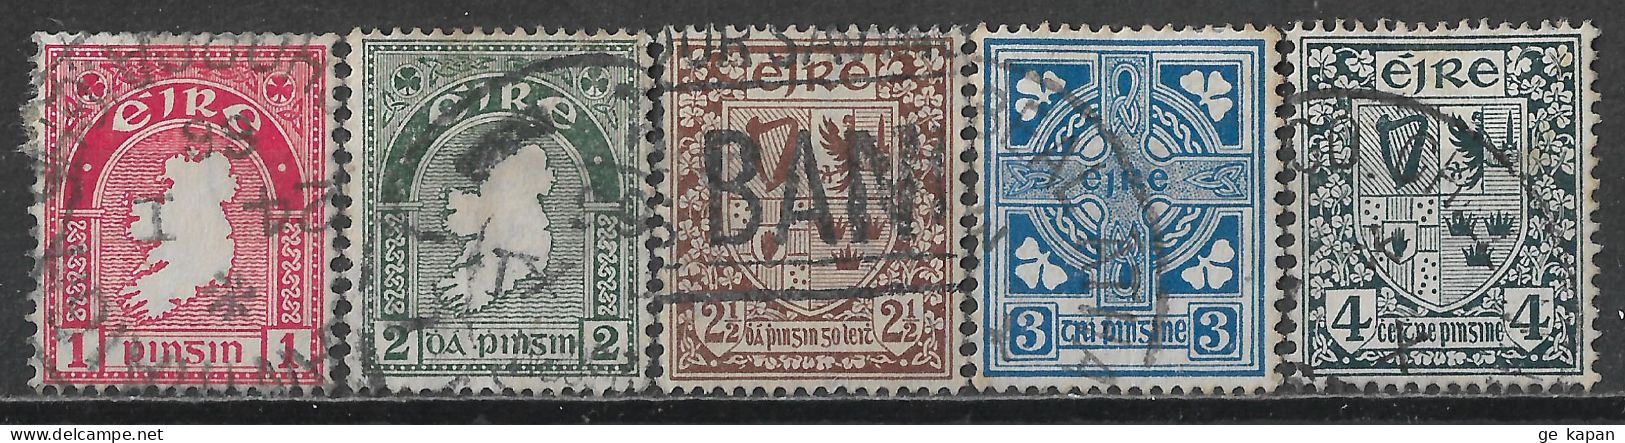 1940-1941 IRELAND SET OF 5 USED STAMPS (Michel # 72A,74A,75A,76AI,77A) CV €1.80 - Usati